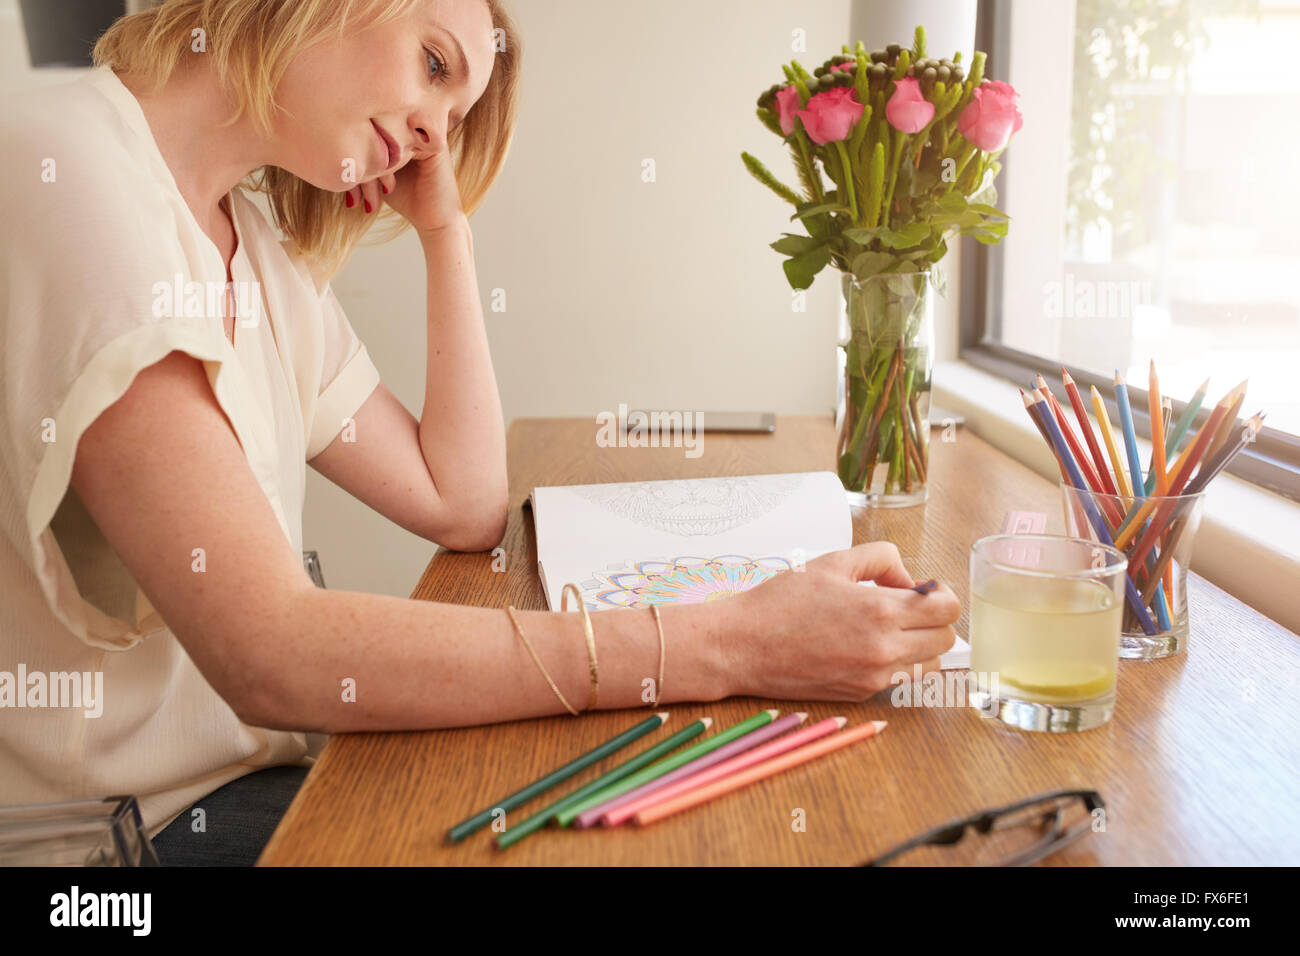 Woman drawing an adult coloring book while comfortably sitting at table by a window. Stock Photo